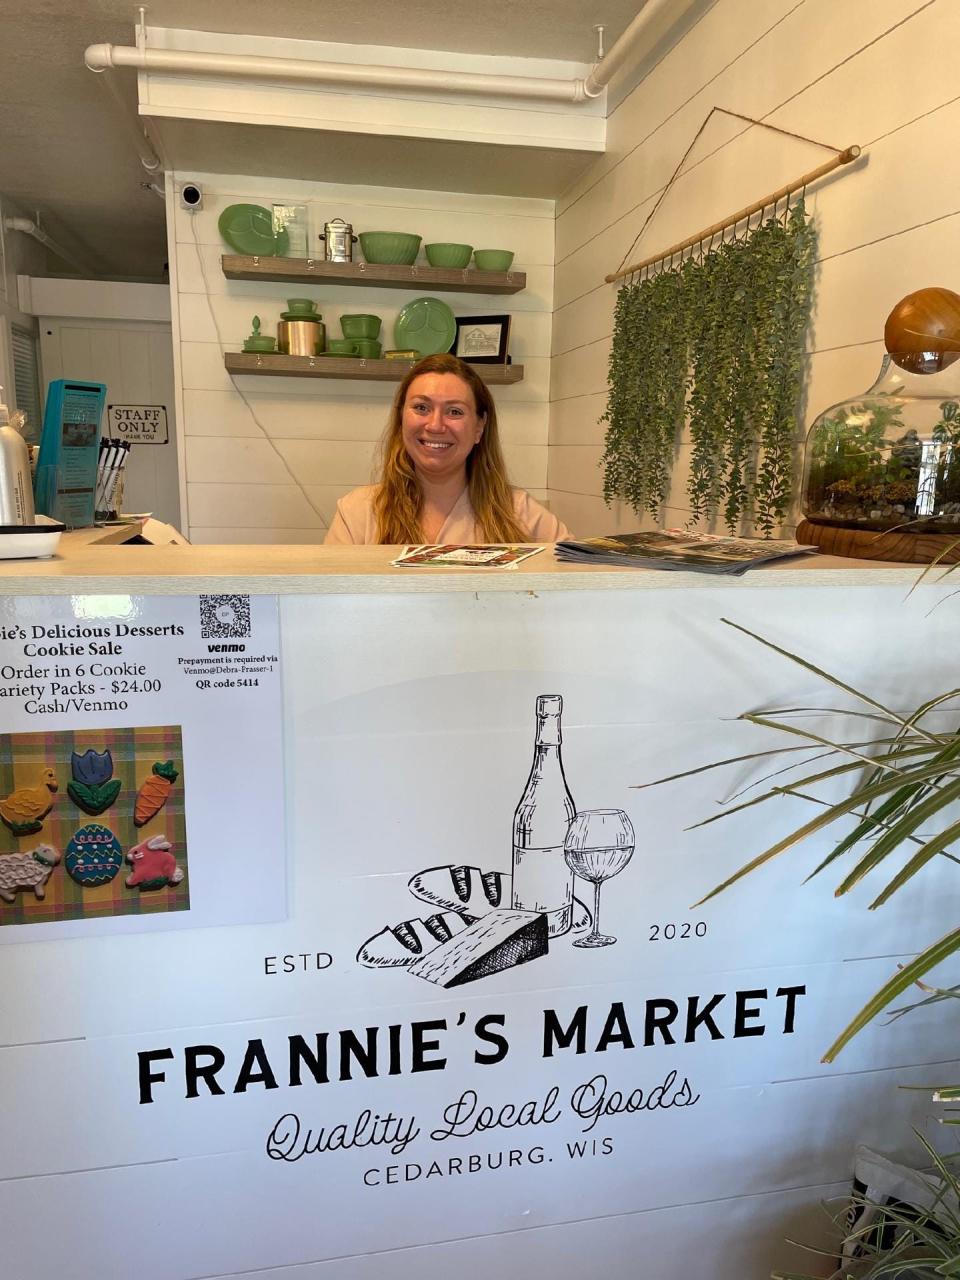 Sarah Prasser works behind the counter at Frannie's Market, where she teaches classes to create charcuterie boards.